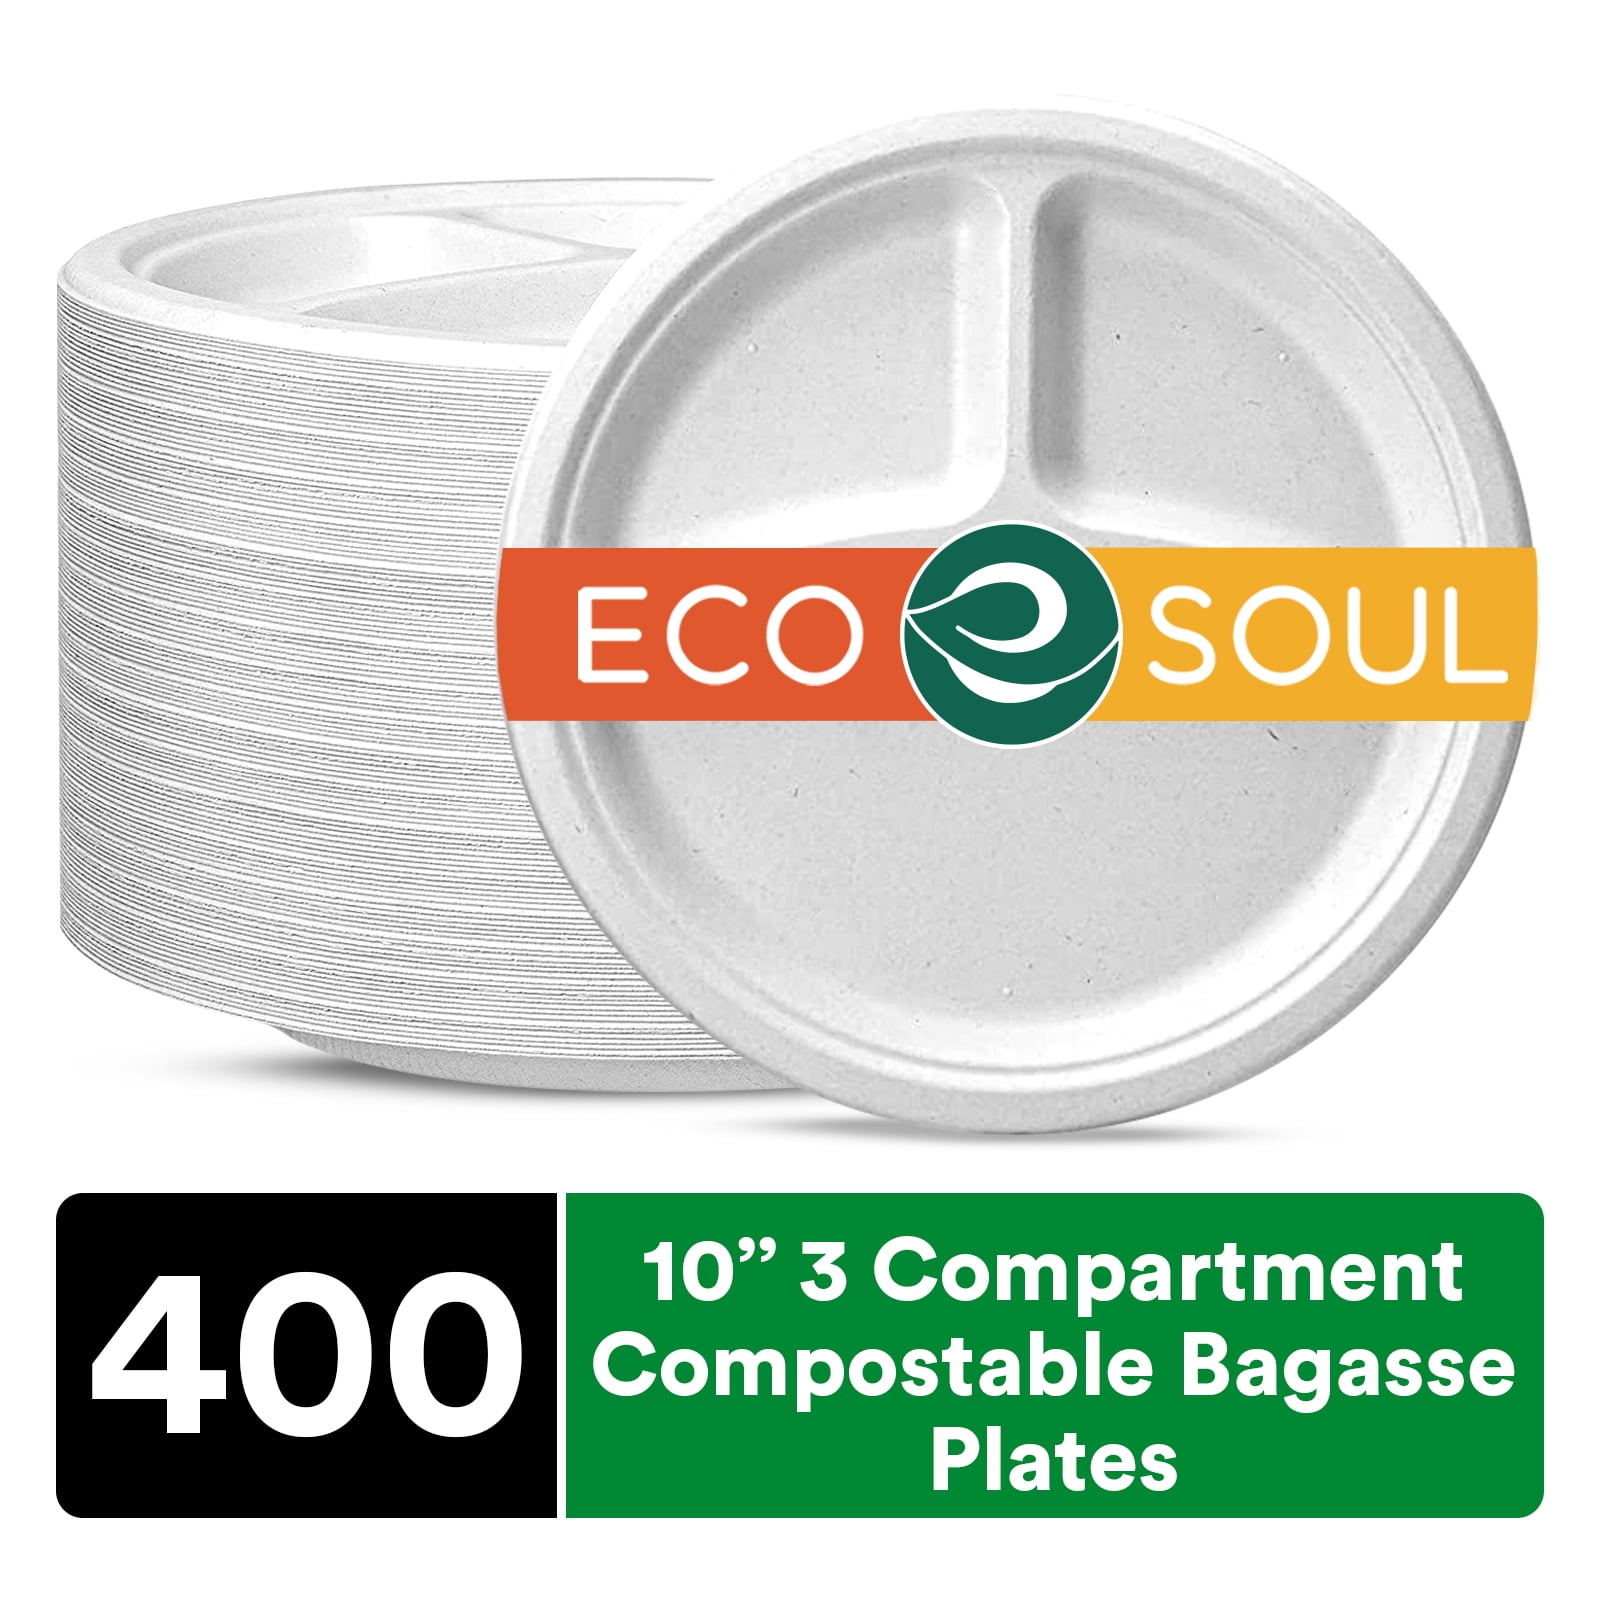 Hefty Ecosave 10 1/8 In Compostable Plates, 16 count